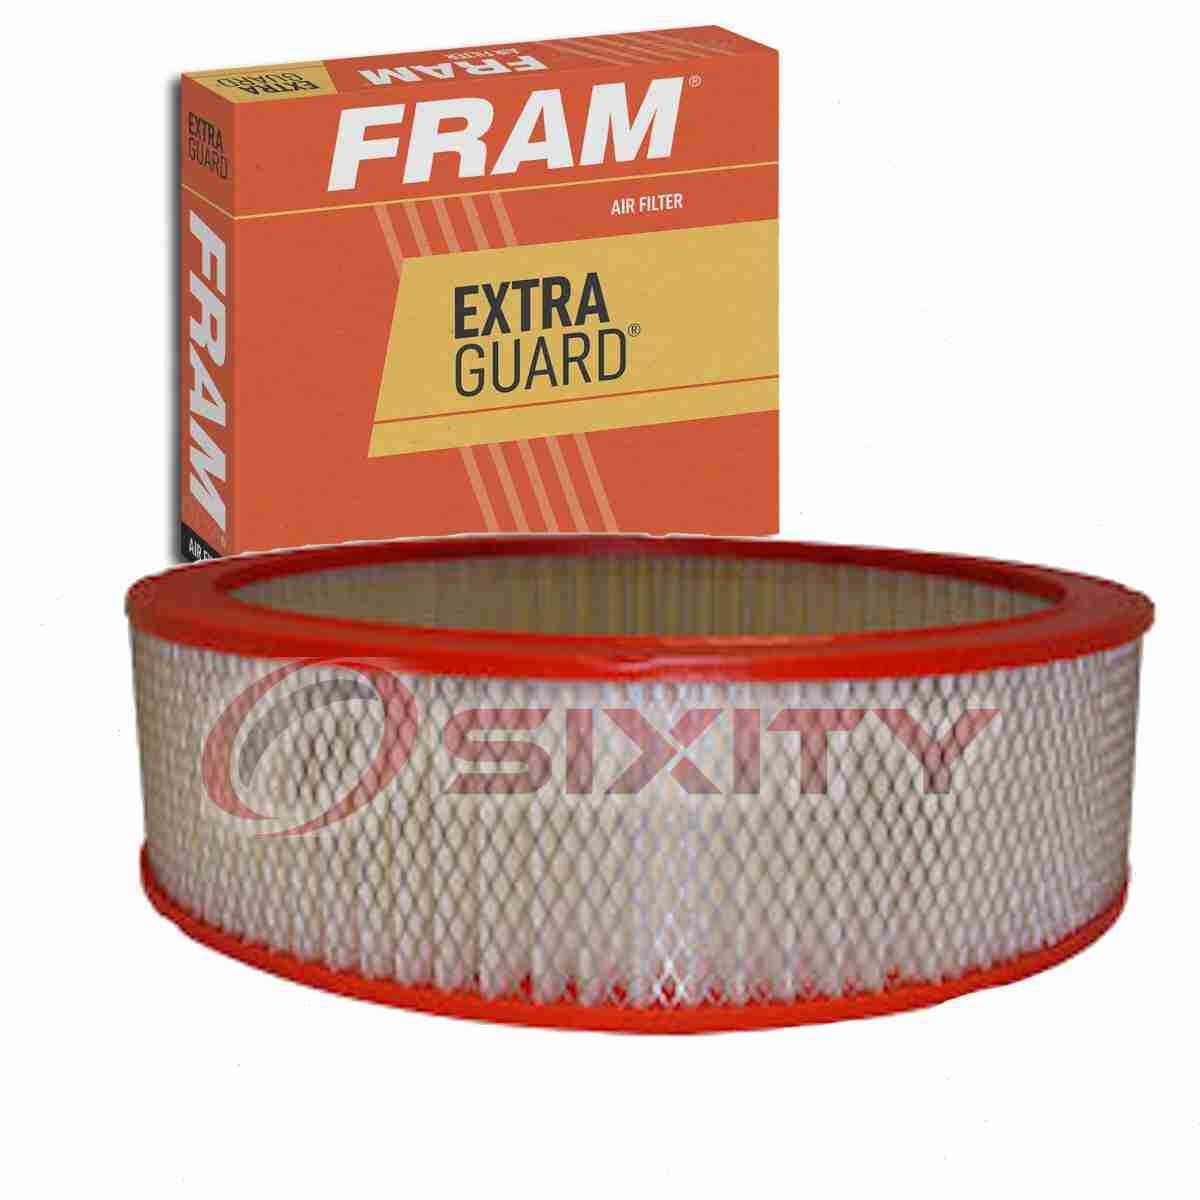 FRAM Extra Guard Air Filter for 1983-1984 GMC Caballero Intake Inlet rn